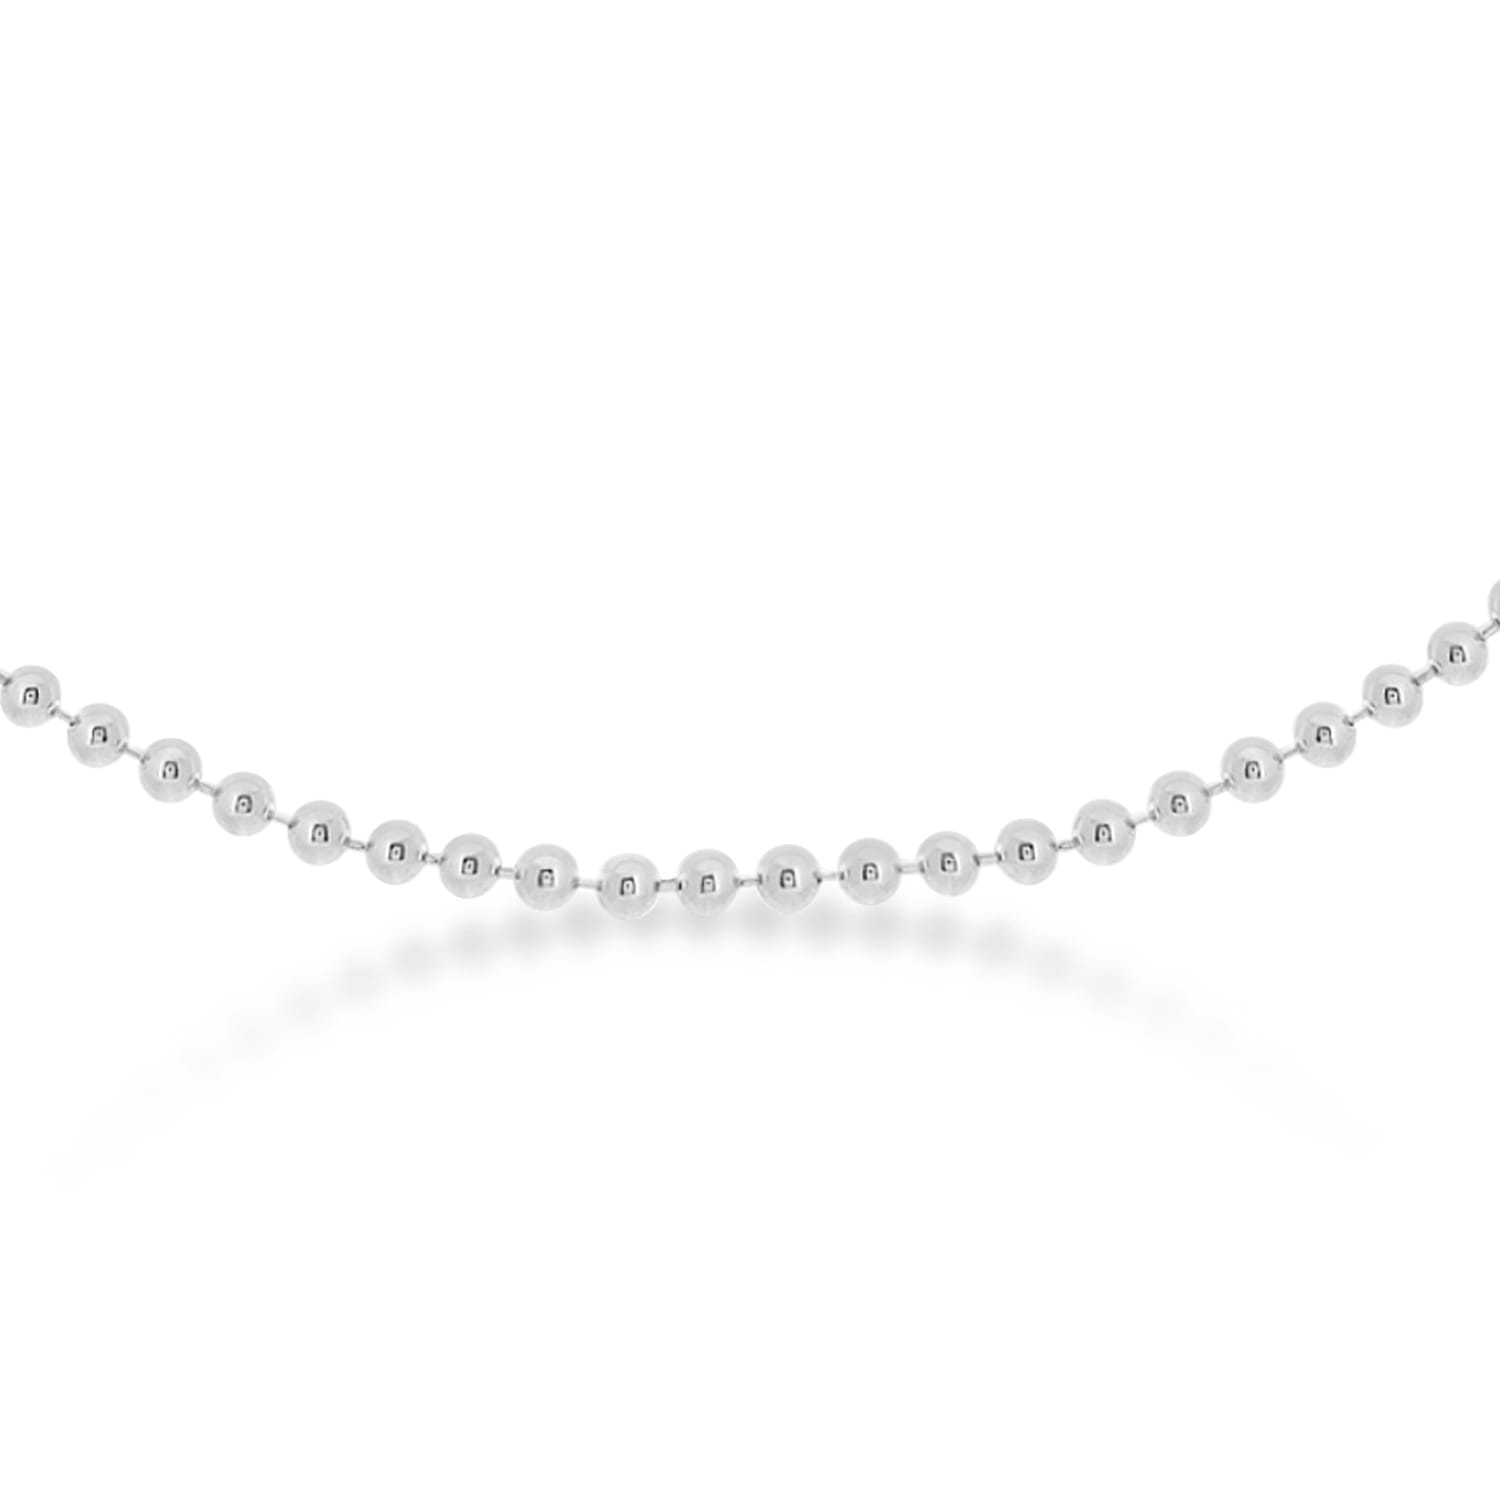 Bead Chain Necklace With Lobster Lock 14k White Gold